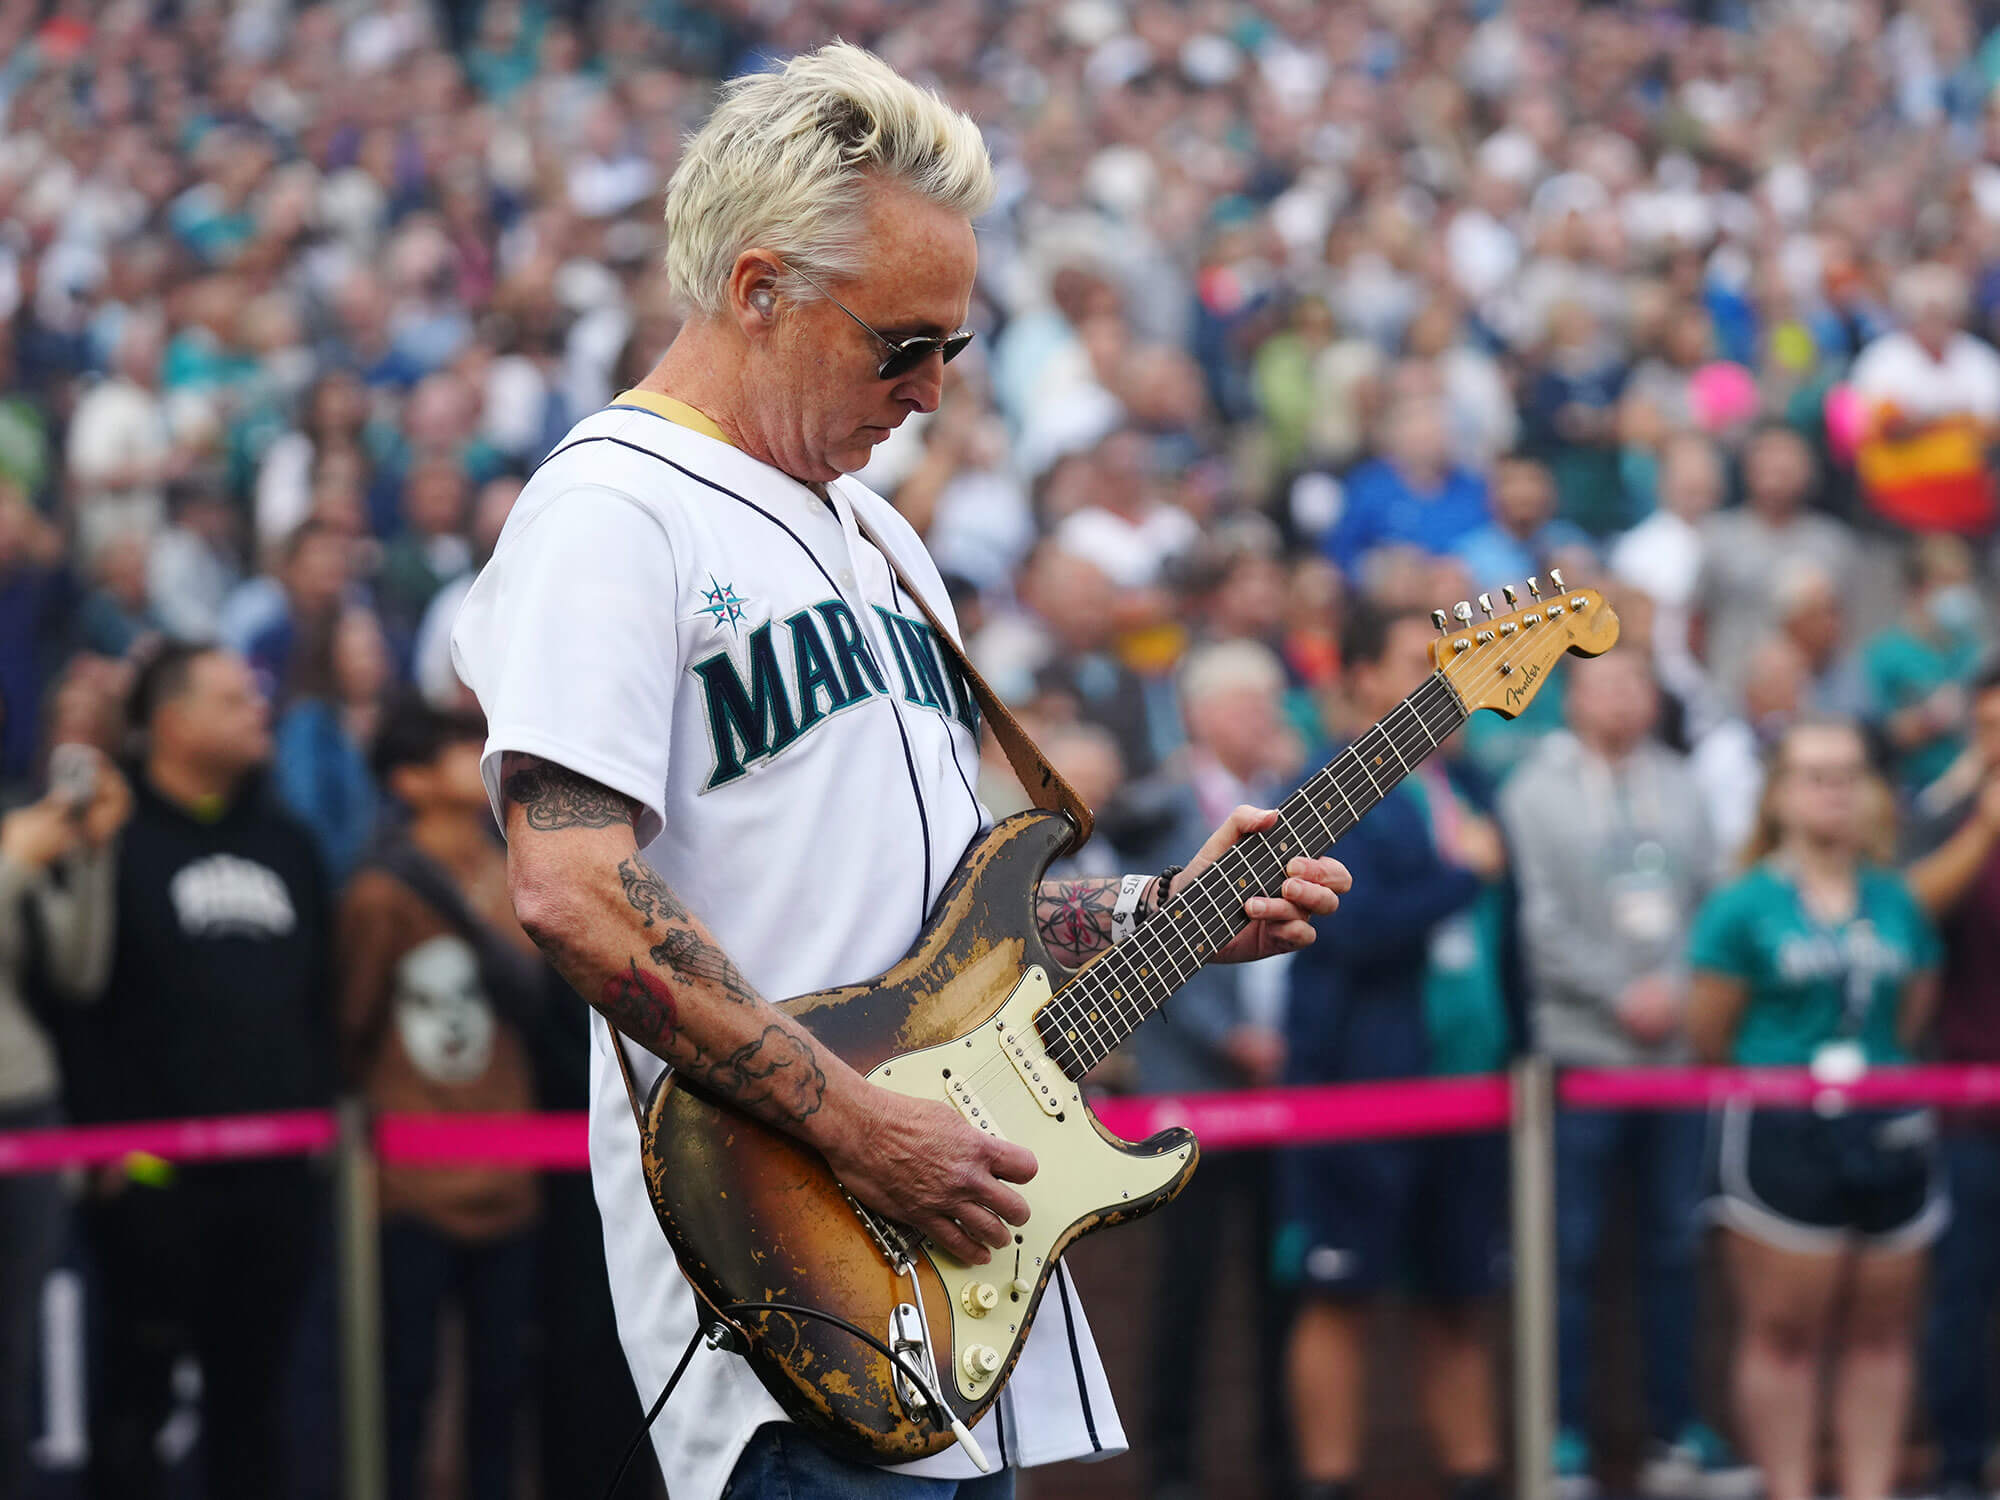 Mike McCready playing guitar live